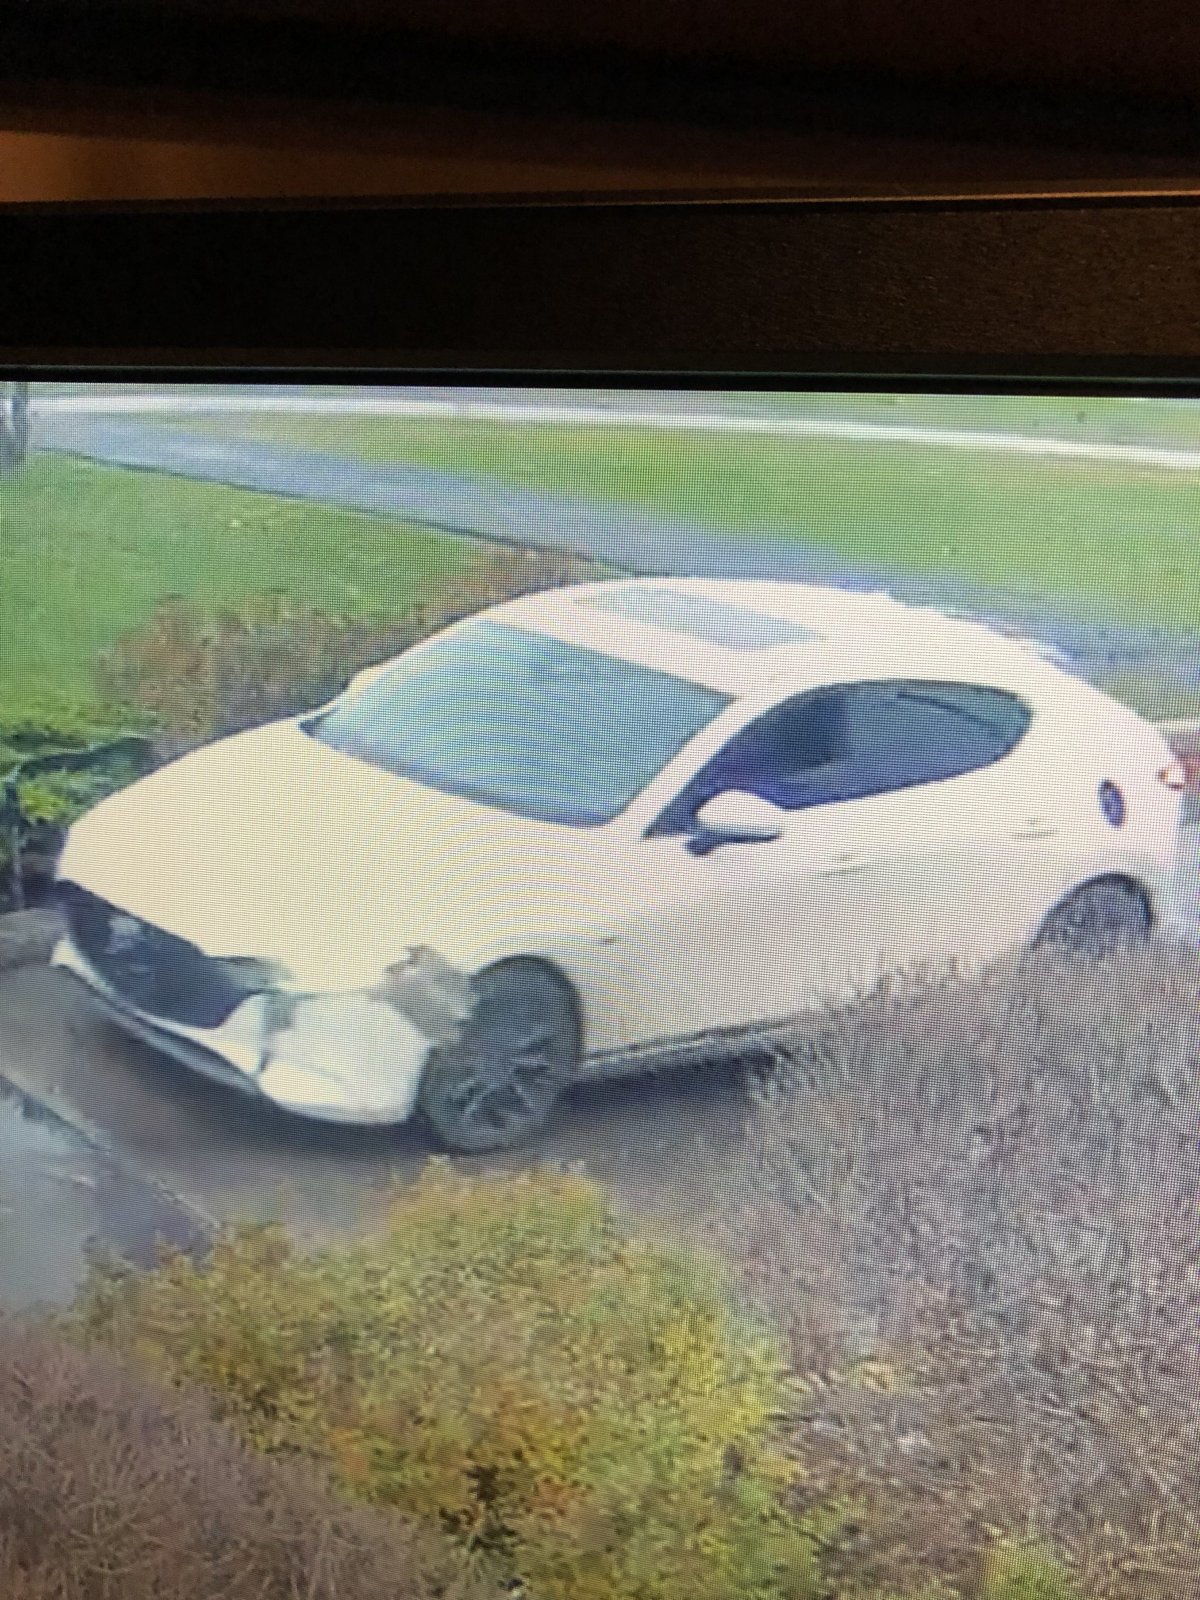 Kingston police are looking for this vehicle, which they say has been involved in several dangerous driving incidents. It may be heavily damaged, police say.